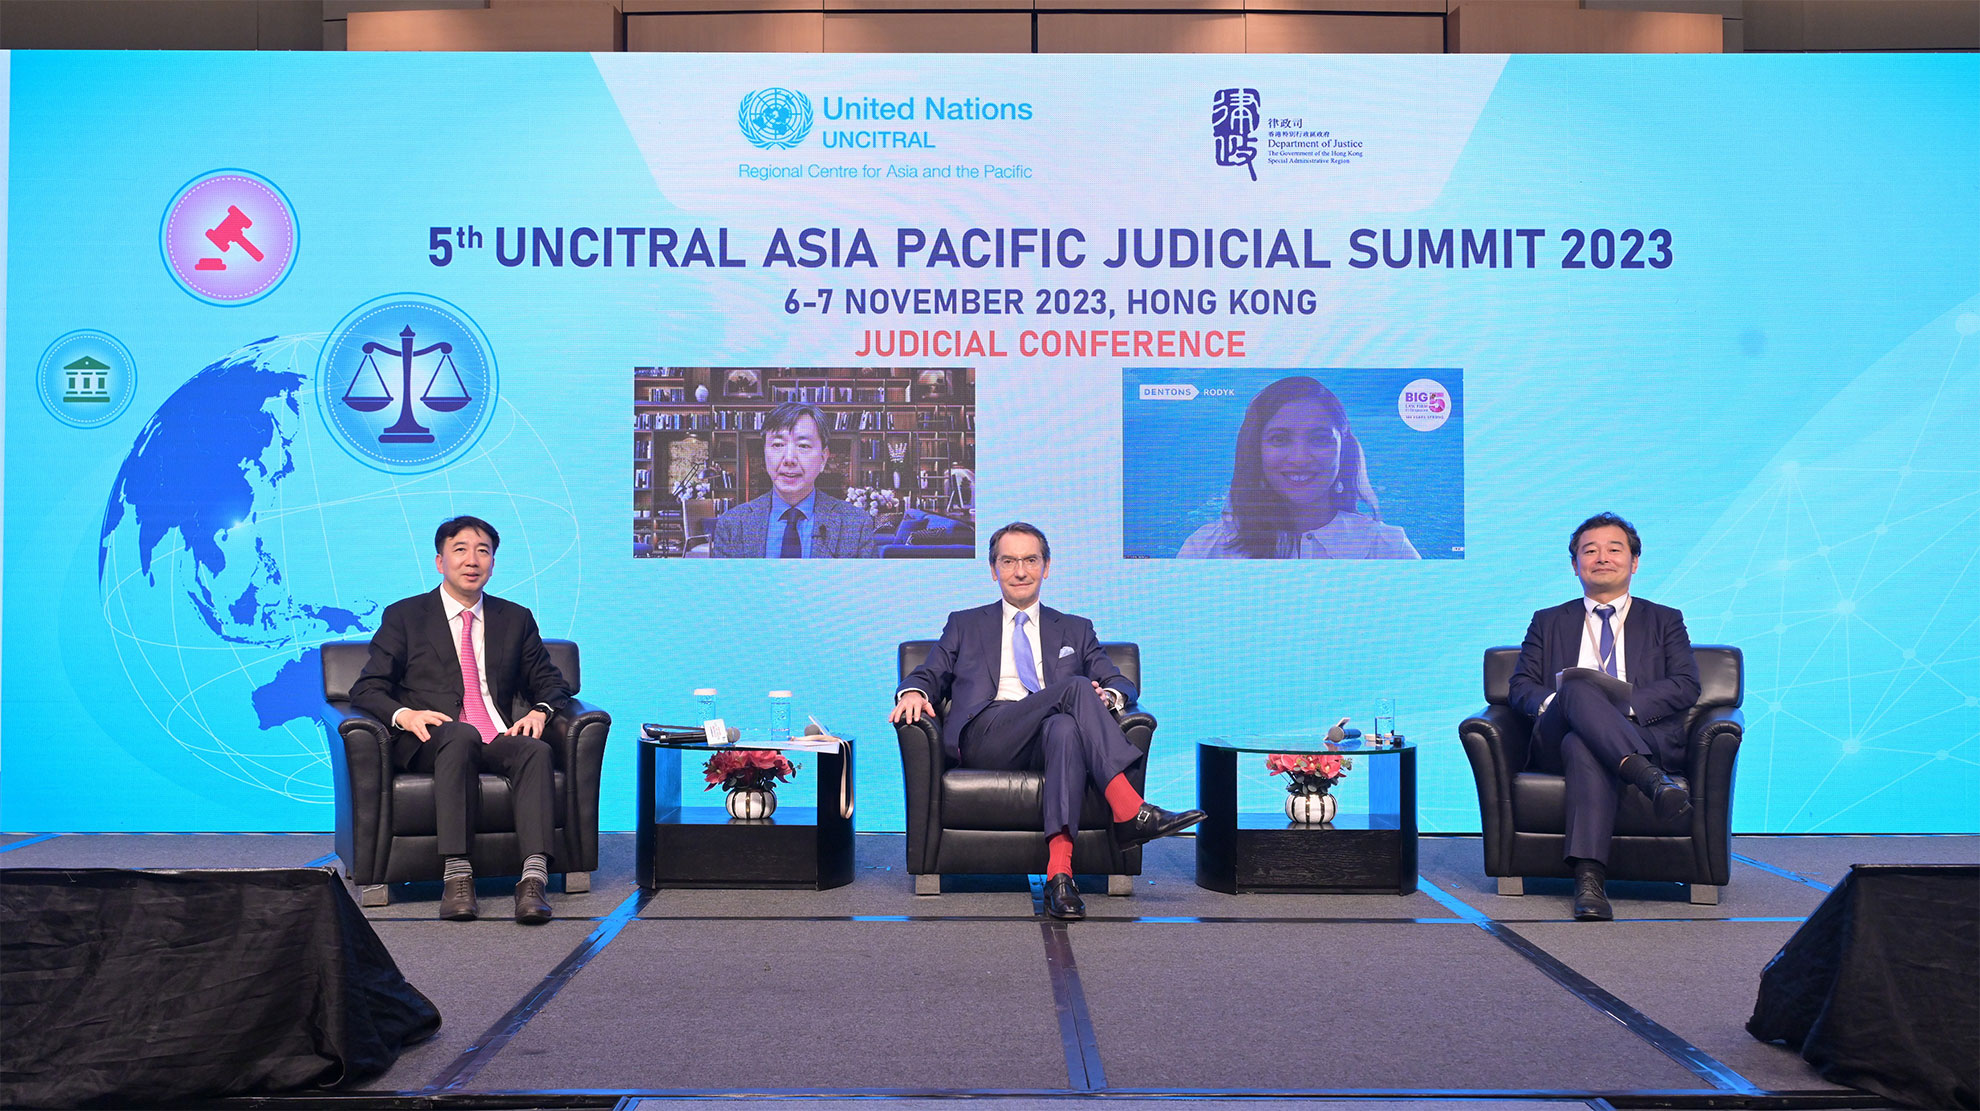 The five-day Hong Kong Legal Week 2023, an annual flagship event of the legal sector and the Department of Justice, themed "Onward & Forward: Connecting the World" began today (November 6). Photo shows (from left) Senior Legal Officer of the United Nations Commission on International Trade Law (UNCITRAL) Mr Lee Jae Sung; Professor of Law of the Seoul National University of the Republic of Korea Dr Lee Jaemin (left on screen); Judge of the Court of First Instance of the High Court The Honourable Mr Justice Jonathan Russell Harris; Partner of the Dentons Rodyk of Singapore Ms Ipshita Chaturvedi (right on screen); and Legal Officer of UNCITRAL Mr Takashi Takashima at panel session 3 on UNCITRAL's Recent Work on Dispute Resolution (Digital Economy, Insolvency and Climate Change) at the 5th UNCITRAL Asia Pacific Judicial Summit - Judicial Conference.